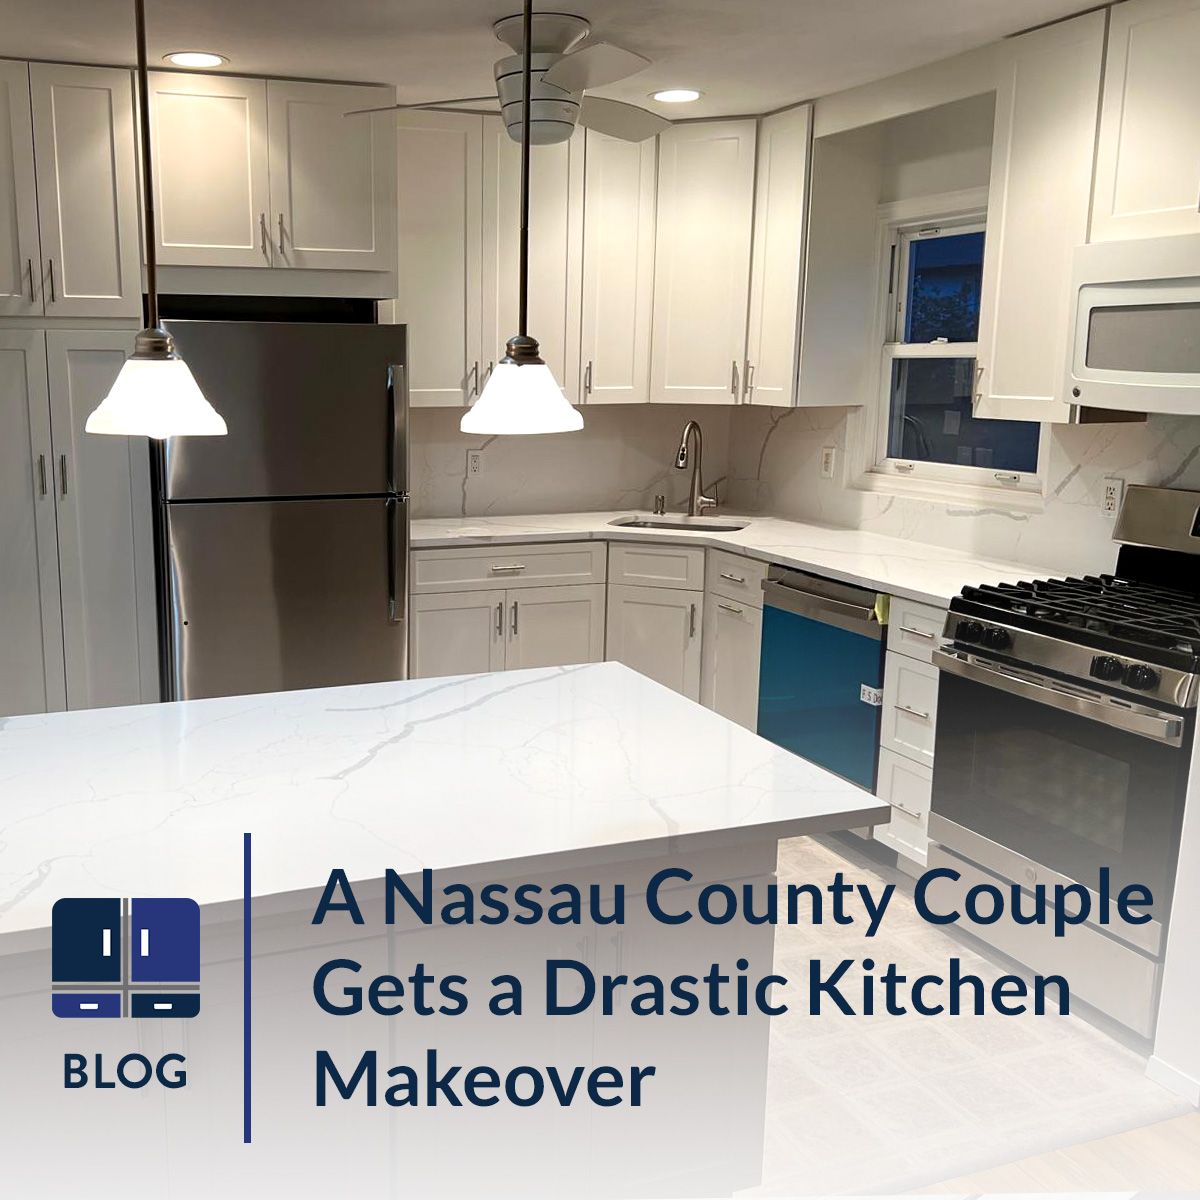 A Nassau County Couple Gets a Drastic Kitchen Makeover